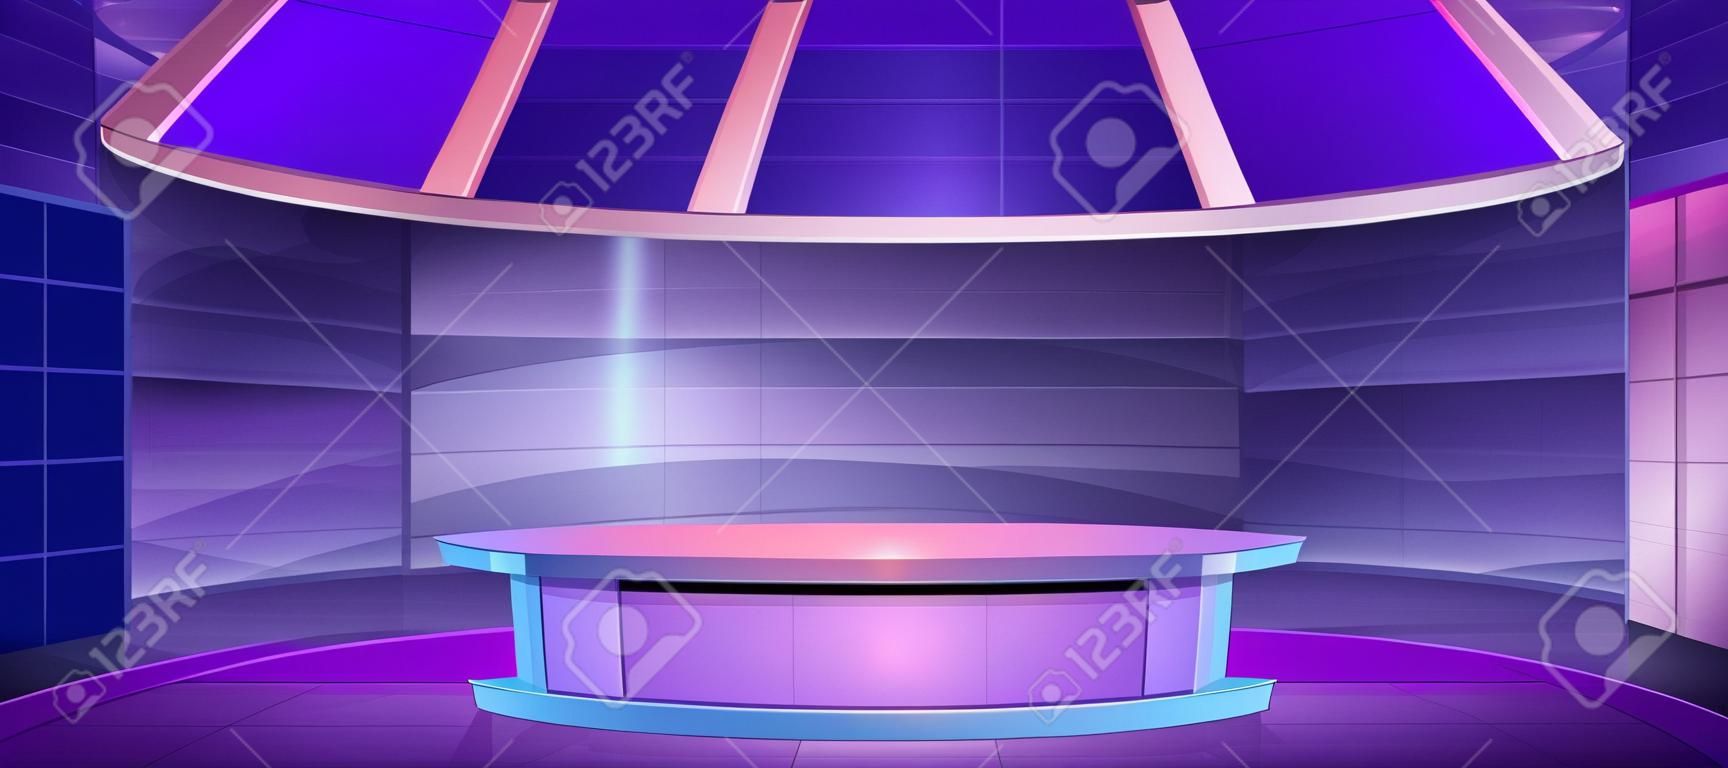 Tv news studio, television broadcast set room with round table and blue screen with world map. Vector cartoon illustration of video channel studio interior with newscaster desk